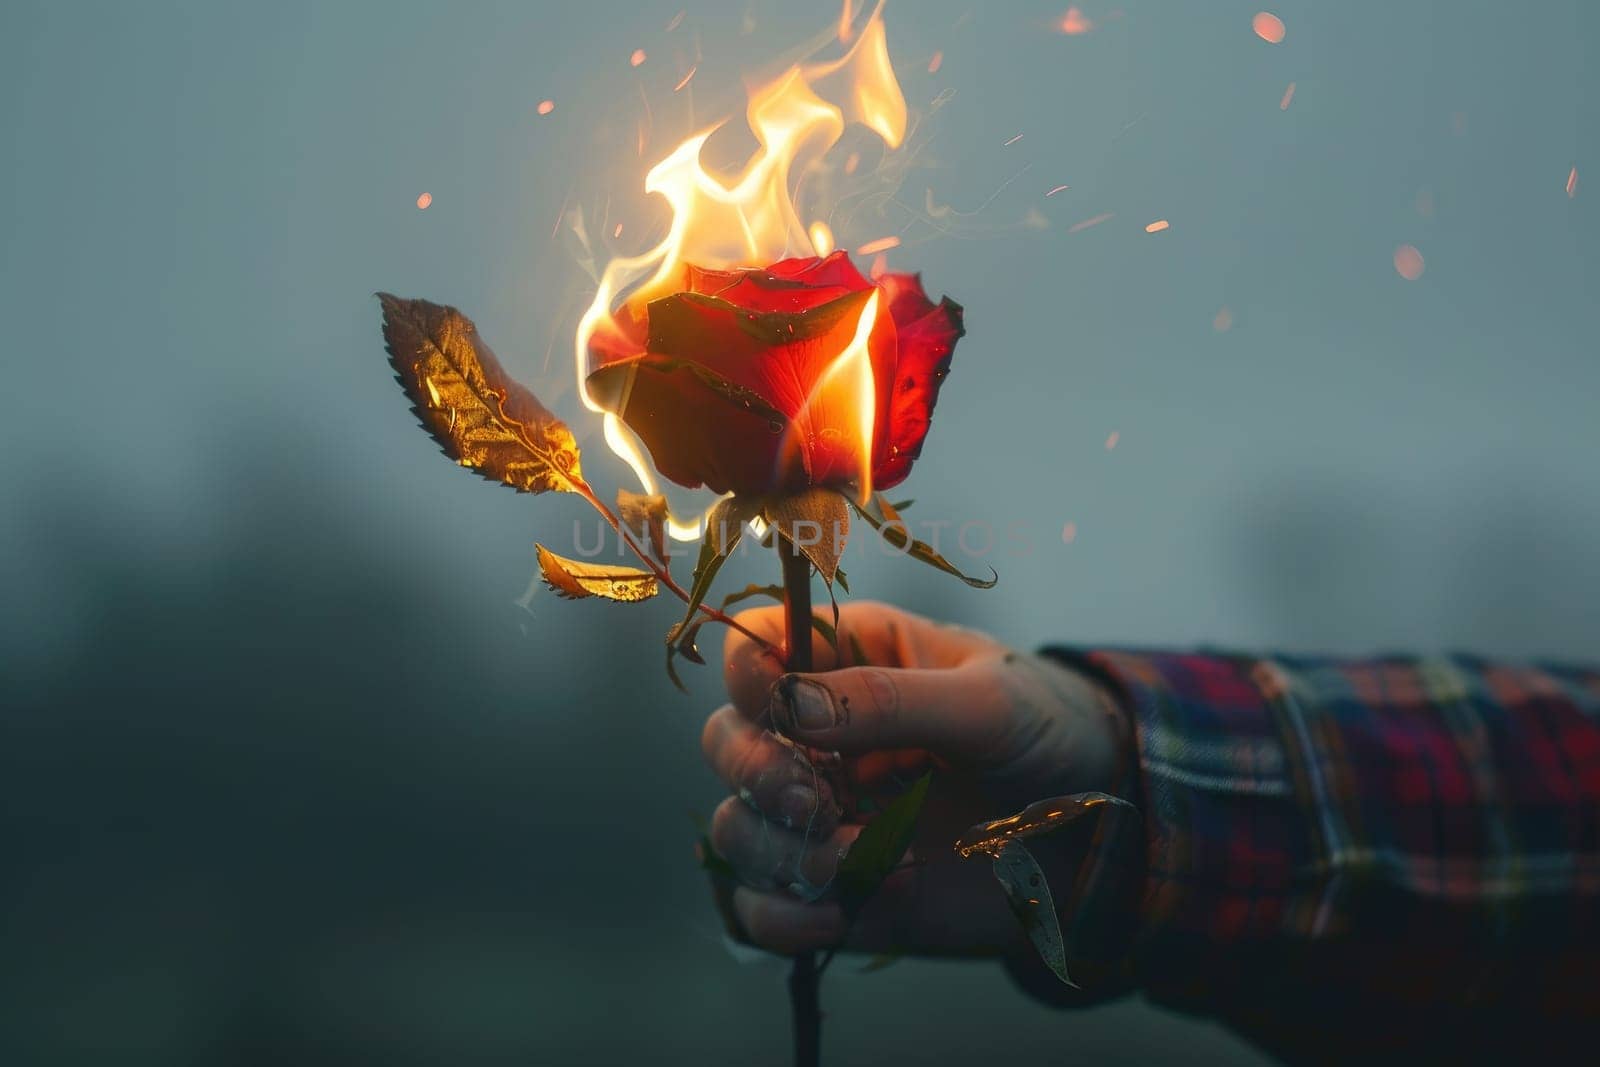 photo of Rose in from of burn on fire on left hand, minimalistic background